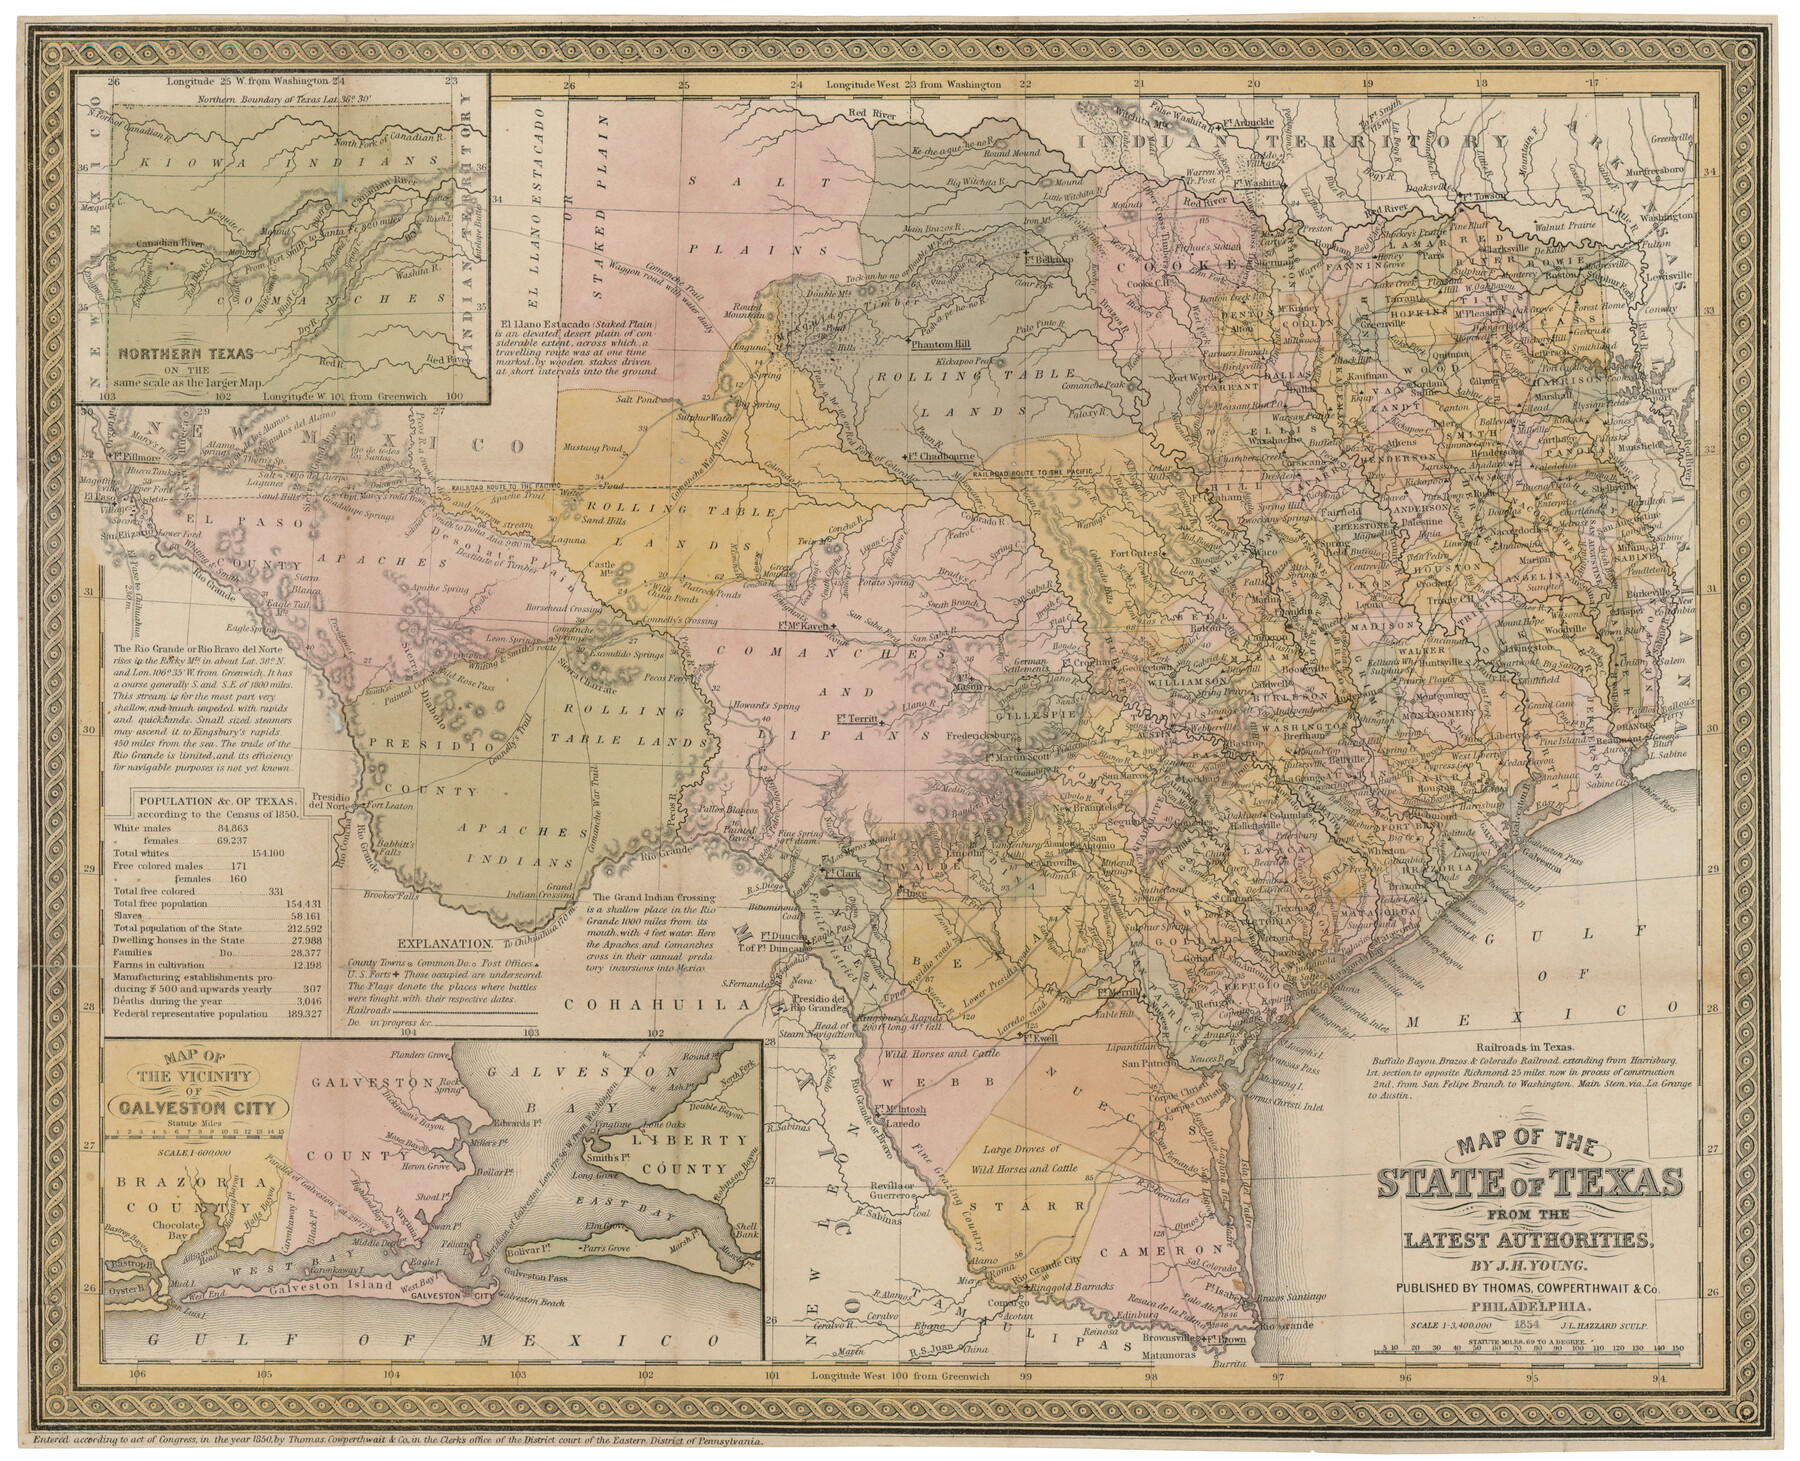 93761, Map of the State of Texas from the latest authorities, Rees-Jones Digital Map Collection